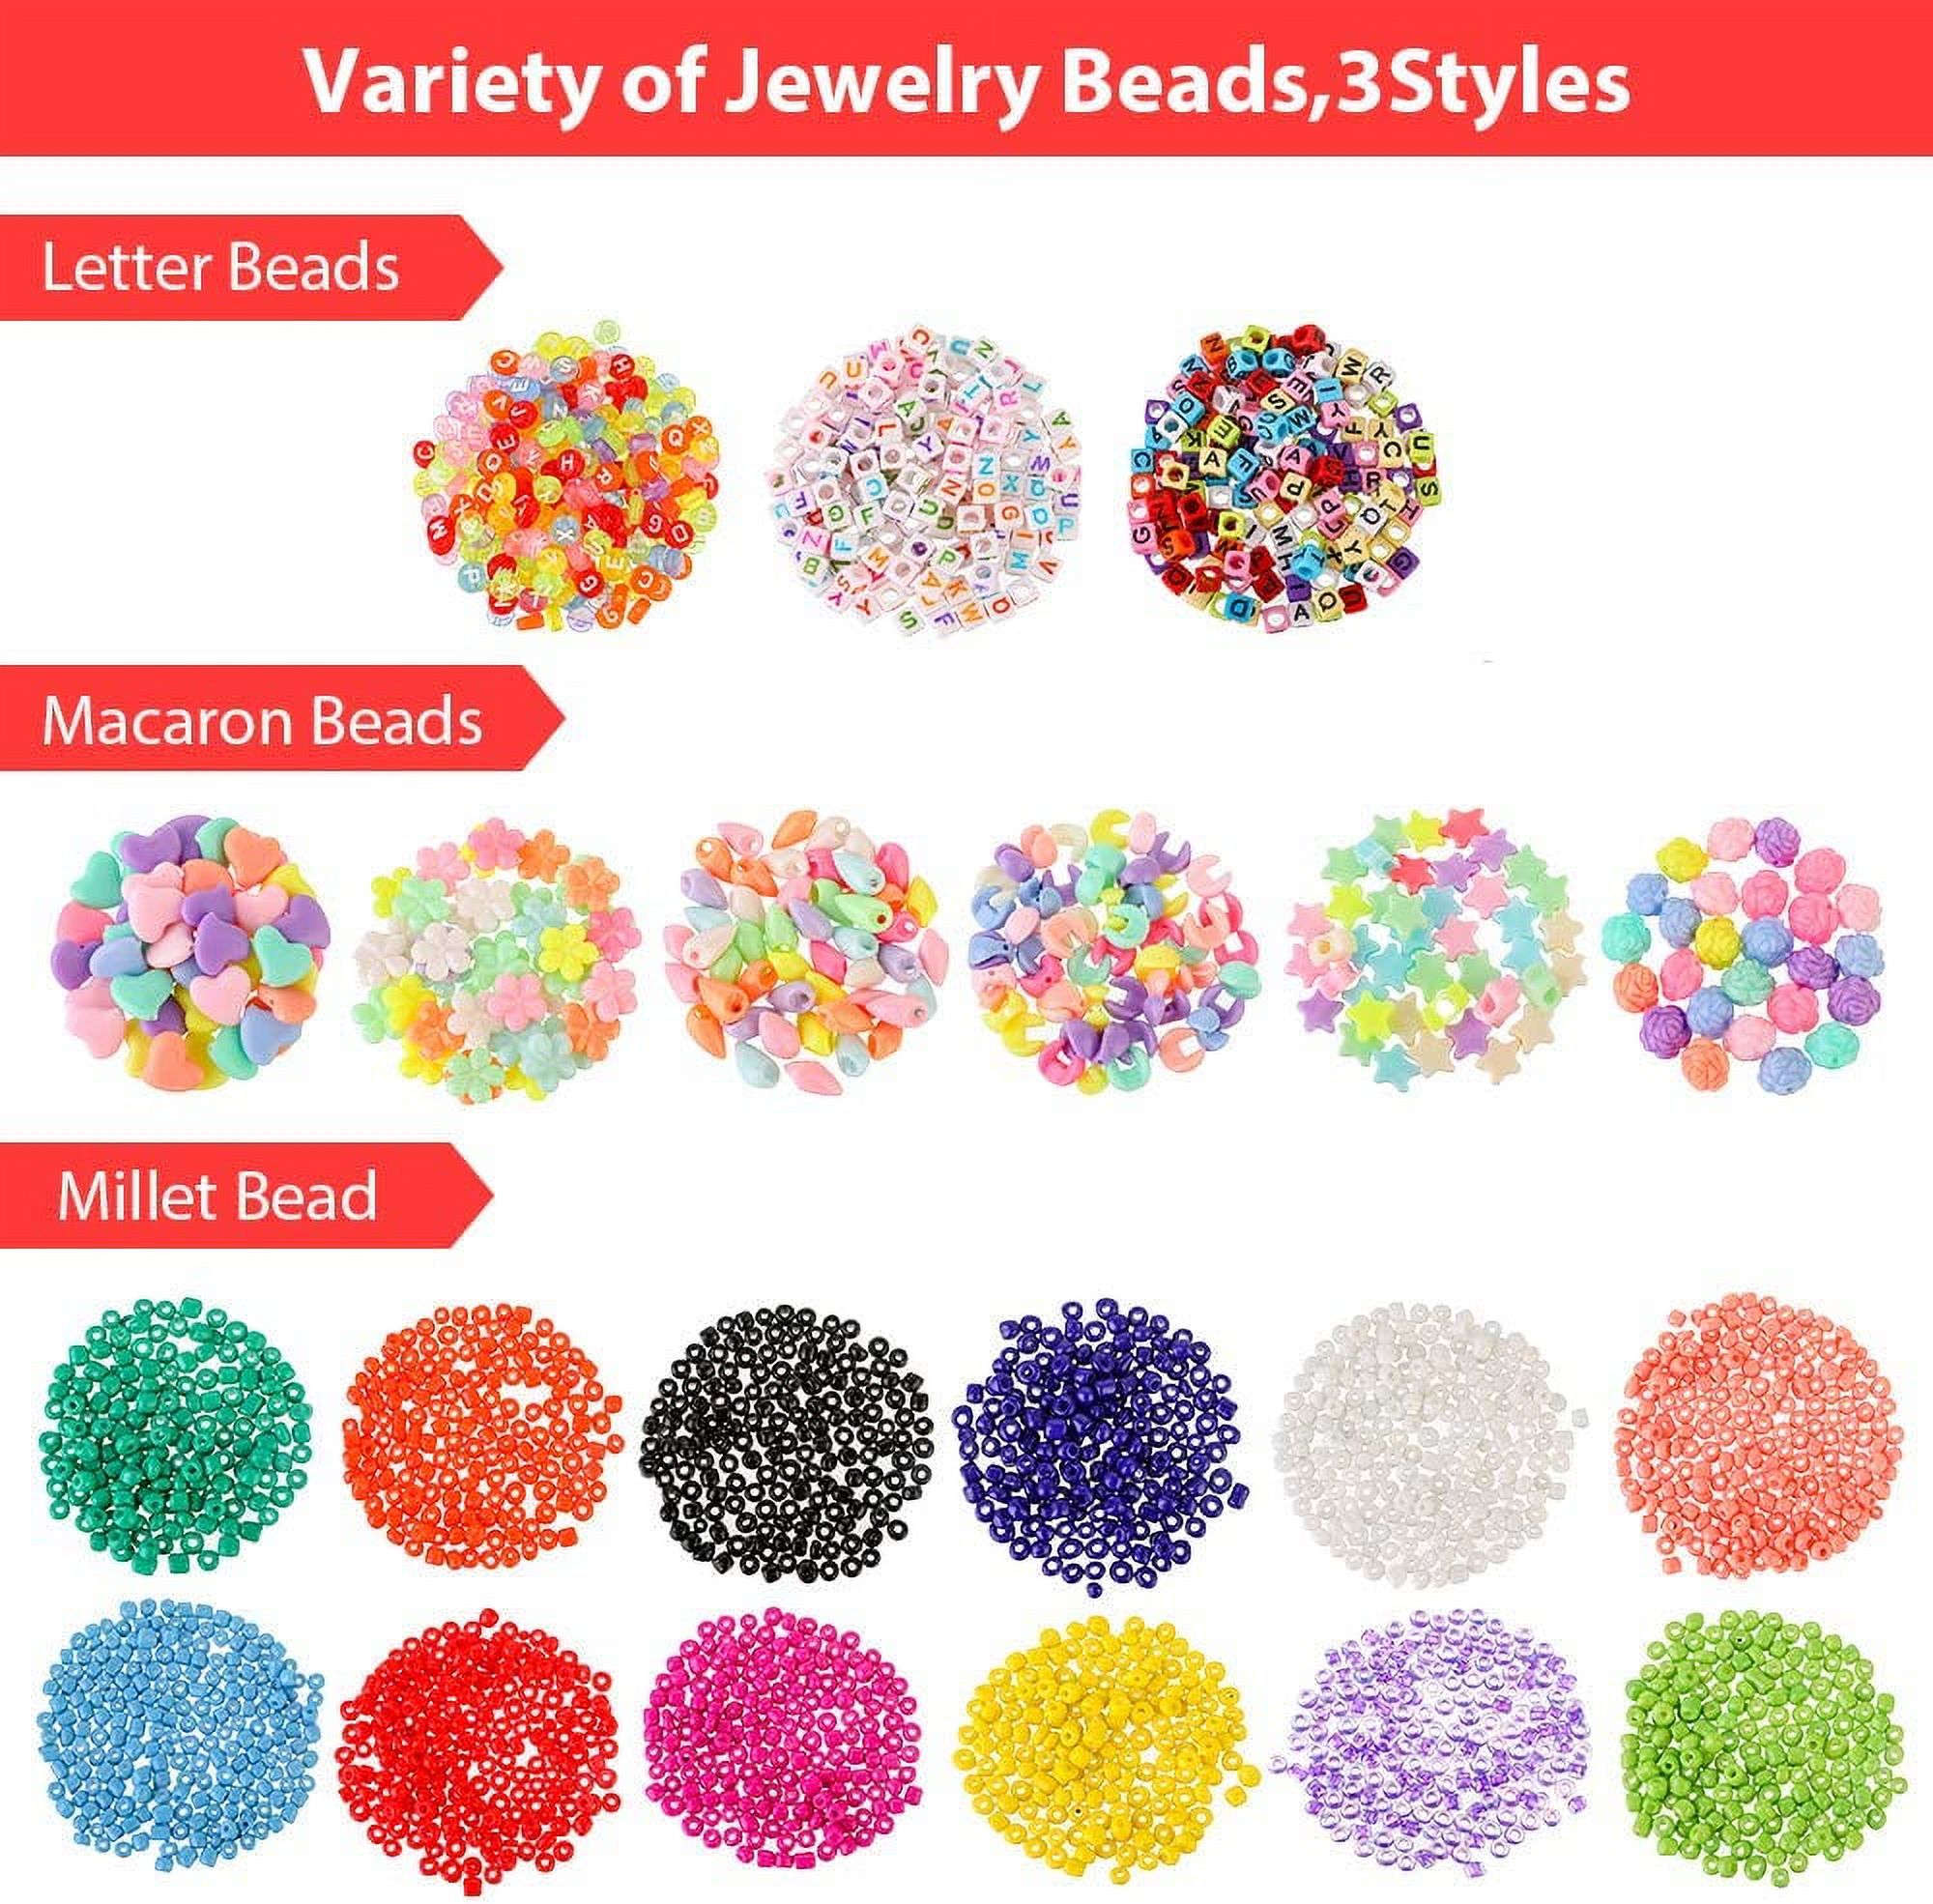 Jewelry Making Kit,Jewelry Making Supplies 7544PCS Include Jewelry Beads and Charms Findings Beading Wire for Necklace Bracelet Earrings Making Repair Jewelry Making Tools Kits for Adults - image 3 of 9